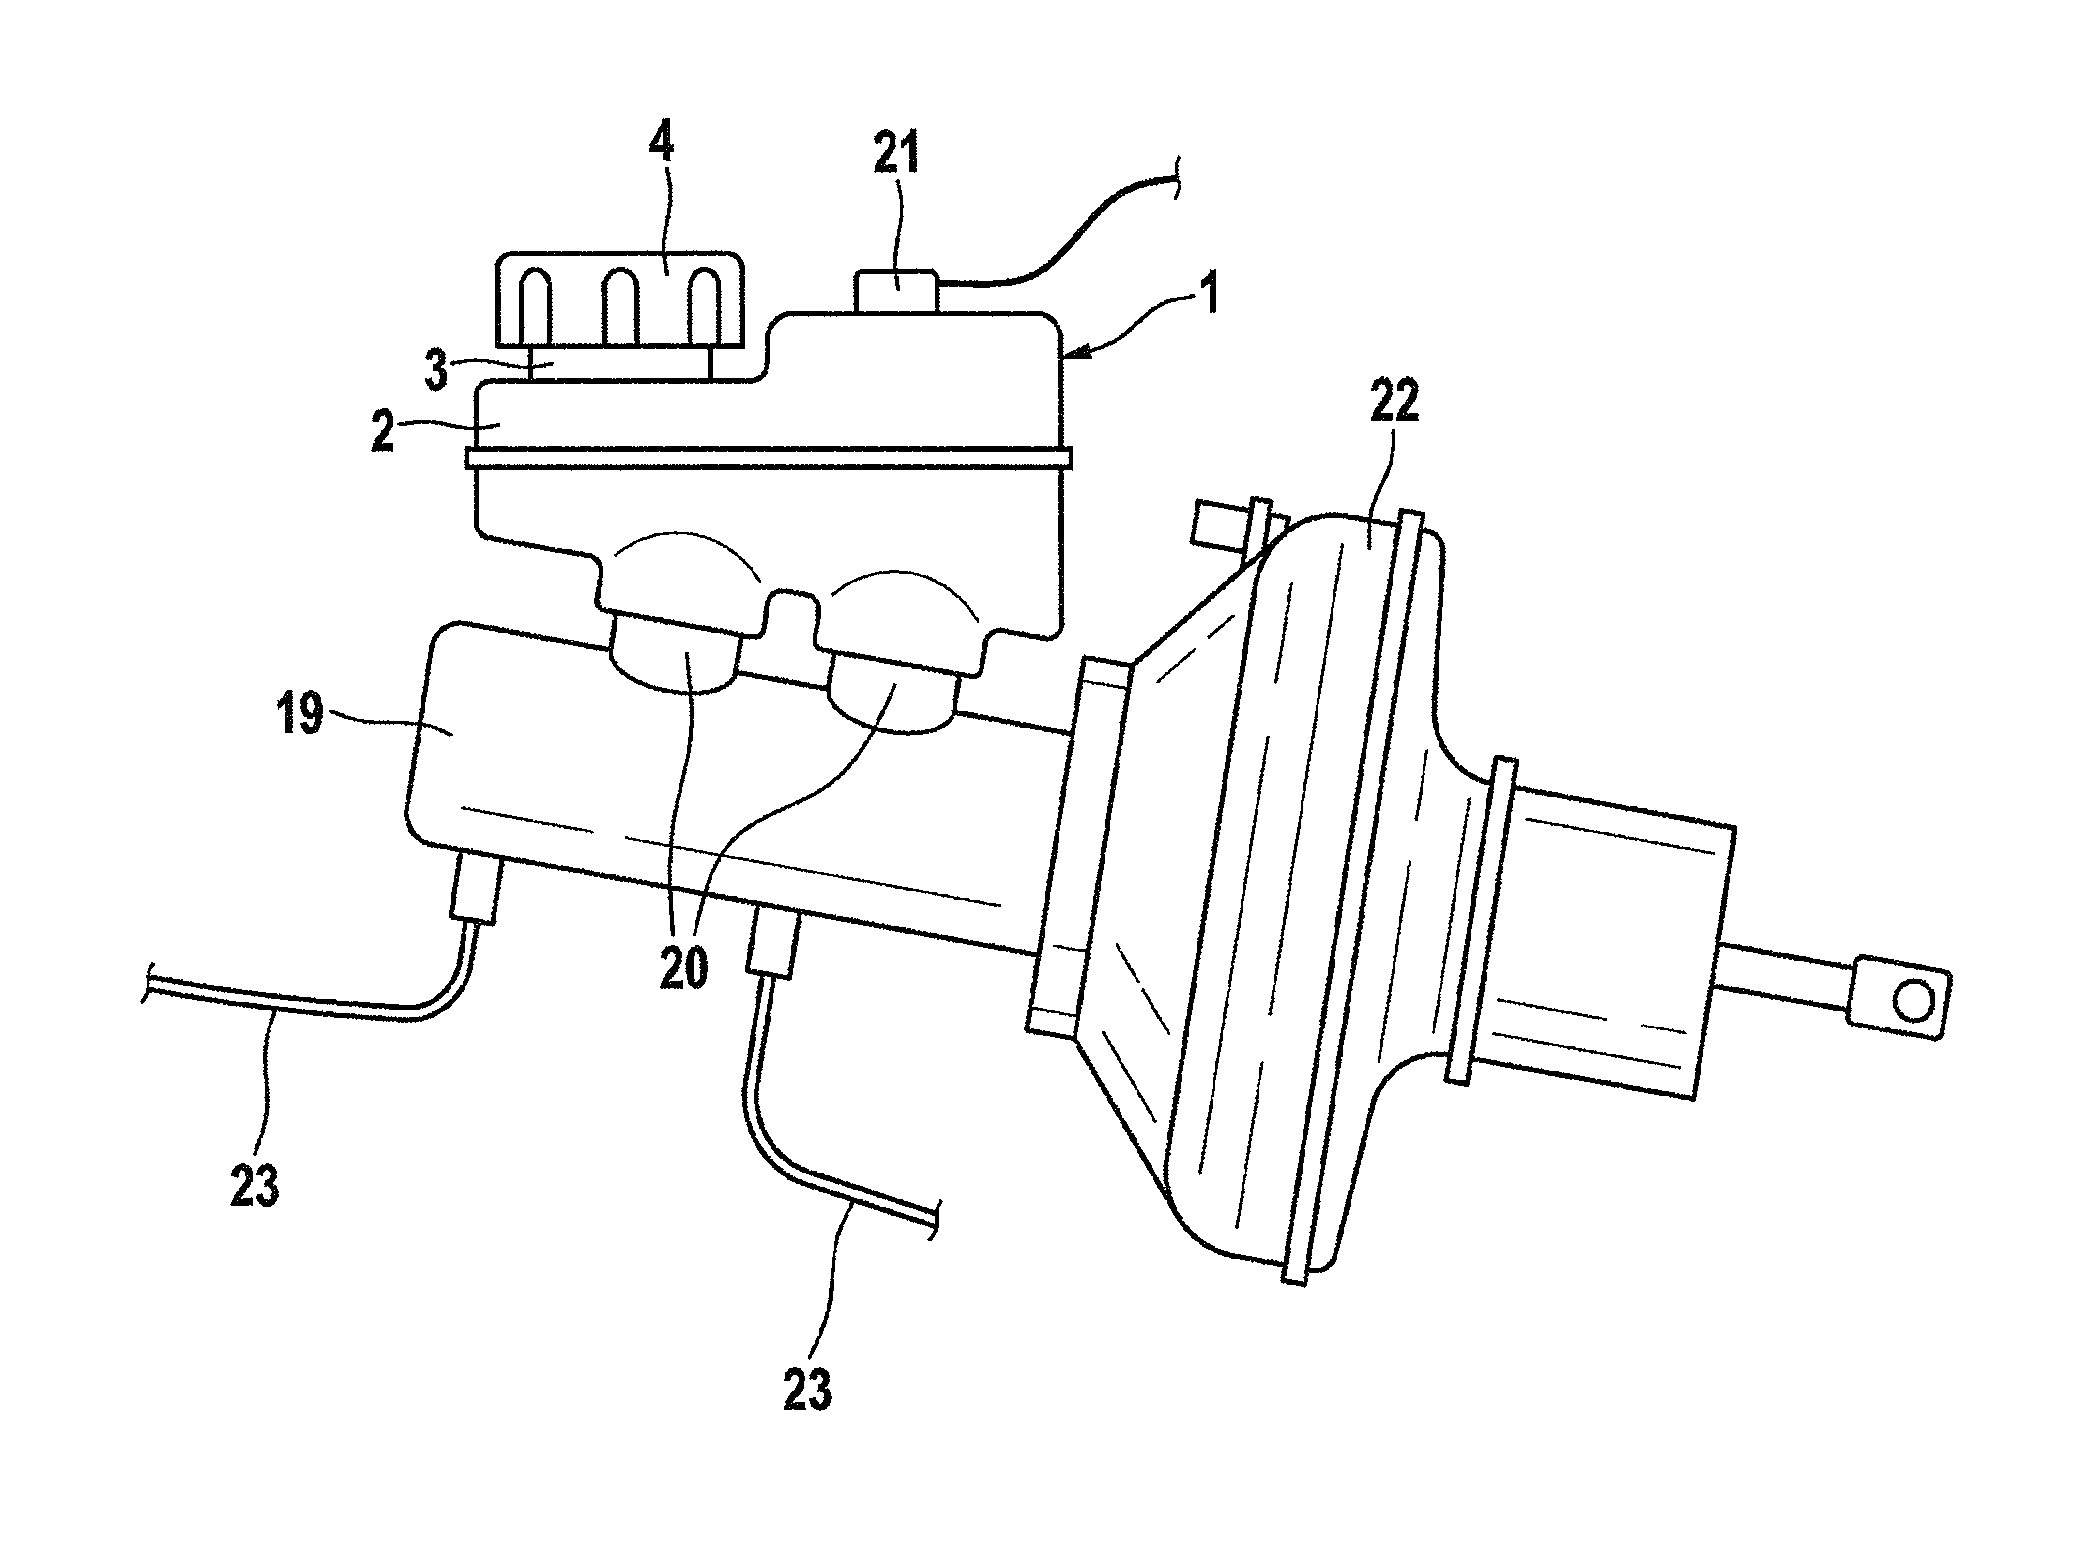 Pressure medium container for a hydraulic motor vehicle brake system